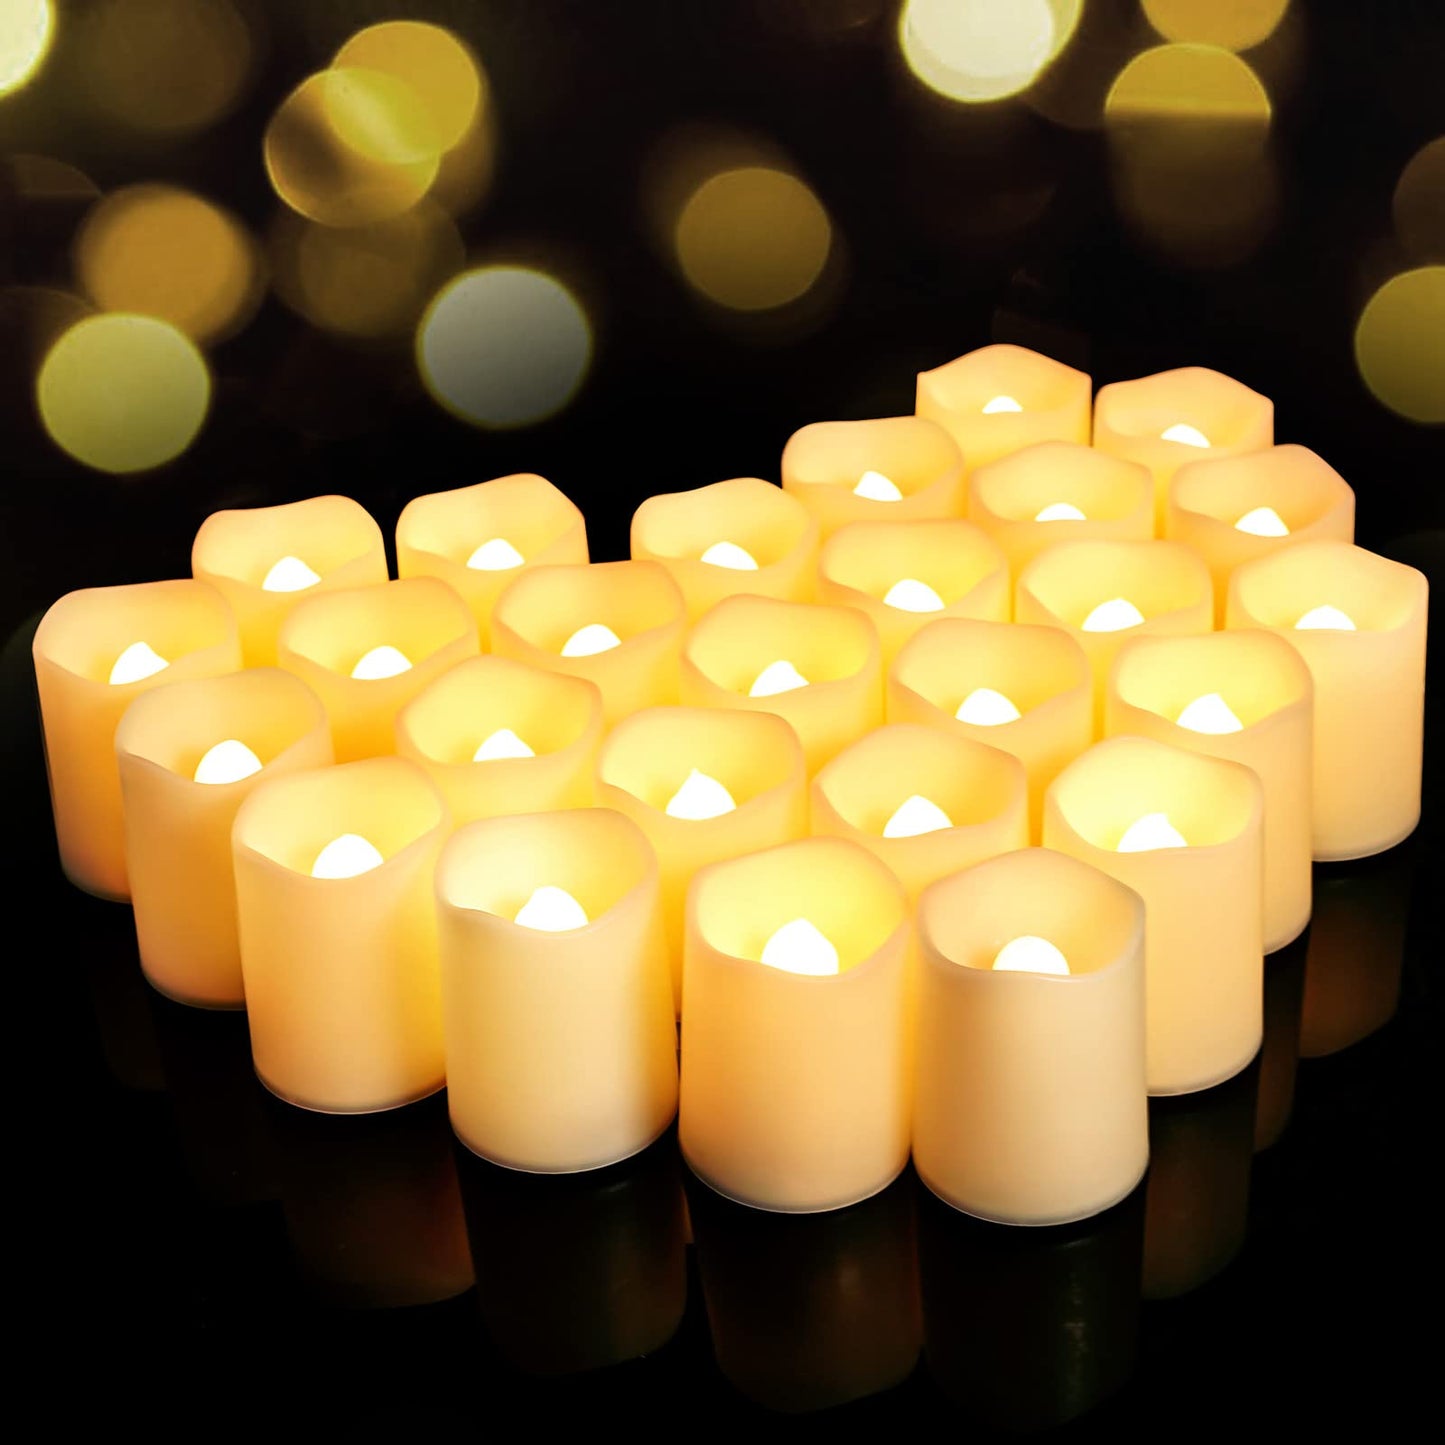 SHYMERY Flameless Votive Candles,Lasts 2X Longer,Battery Operated LED Tea Lights with Warm White Flickering Light,Small Electric Fake Tea Candle Realistic for Wedding,Table,Outdoor,Pack of 12